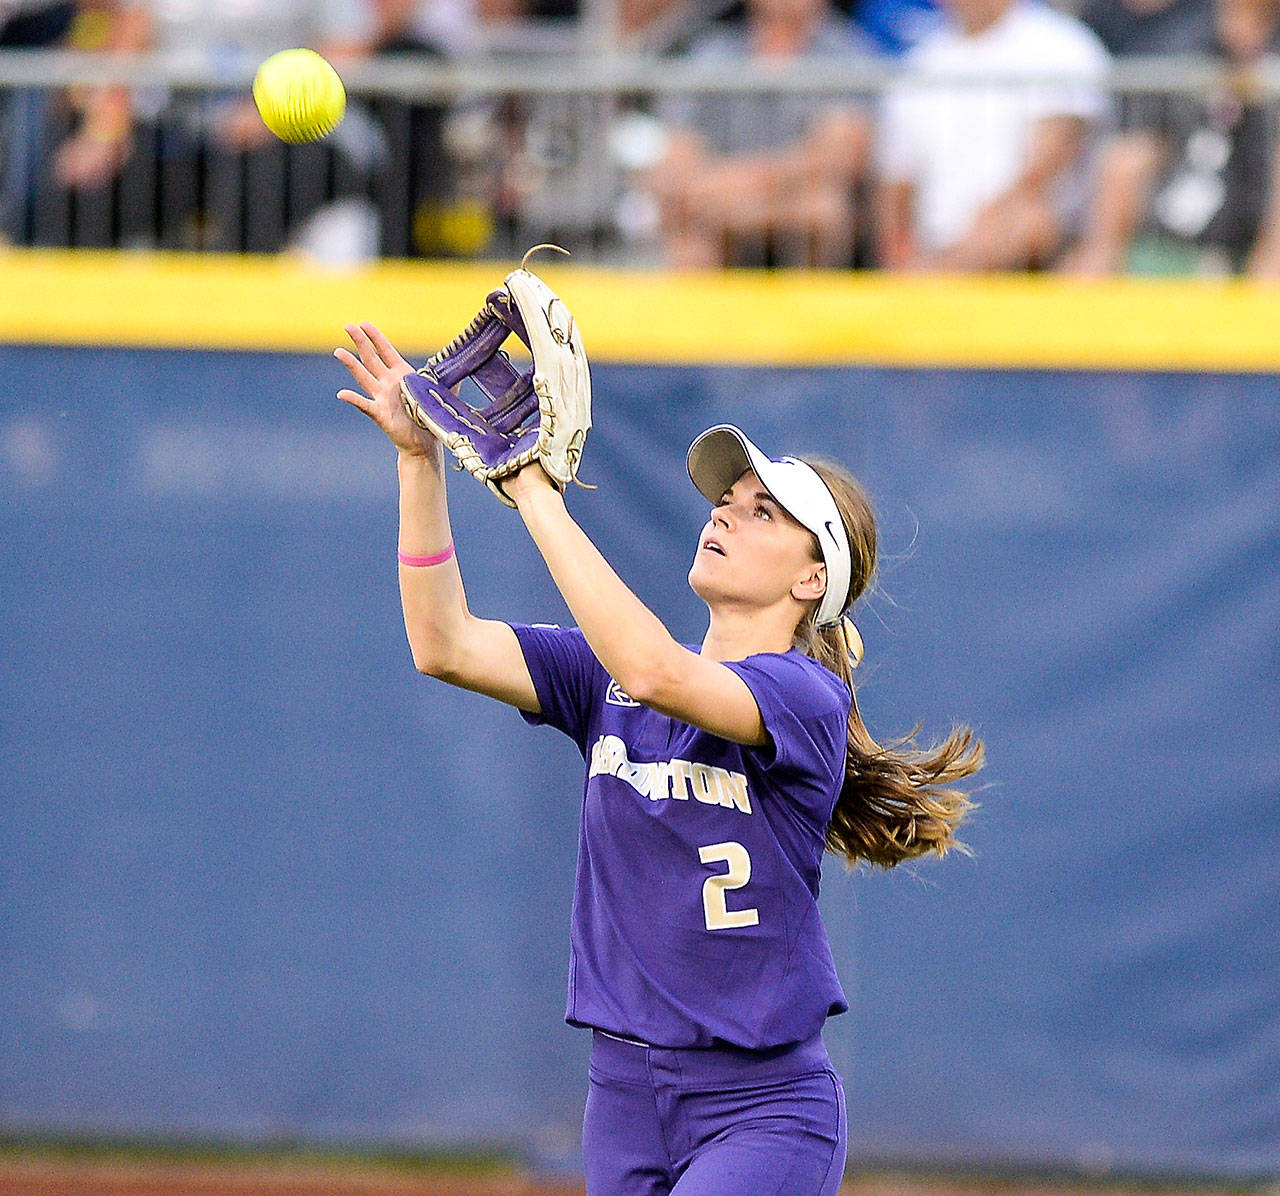 University of Washington outfielder Trysten Melhart, a graduate of Snohomish High School, catches a flyball during one of the Huskies’ games at the recent Women’s College World Series. (University of Washington photo)